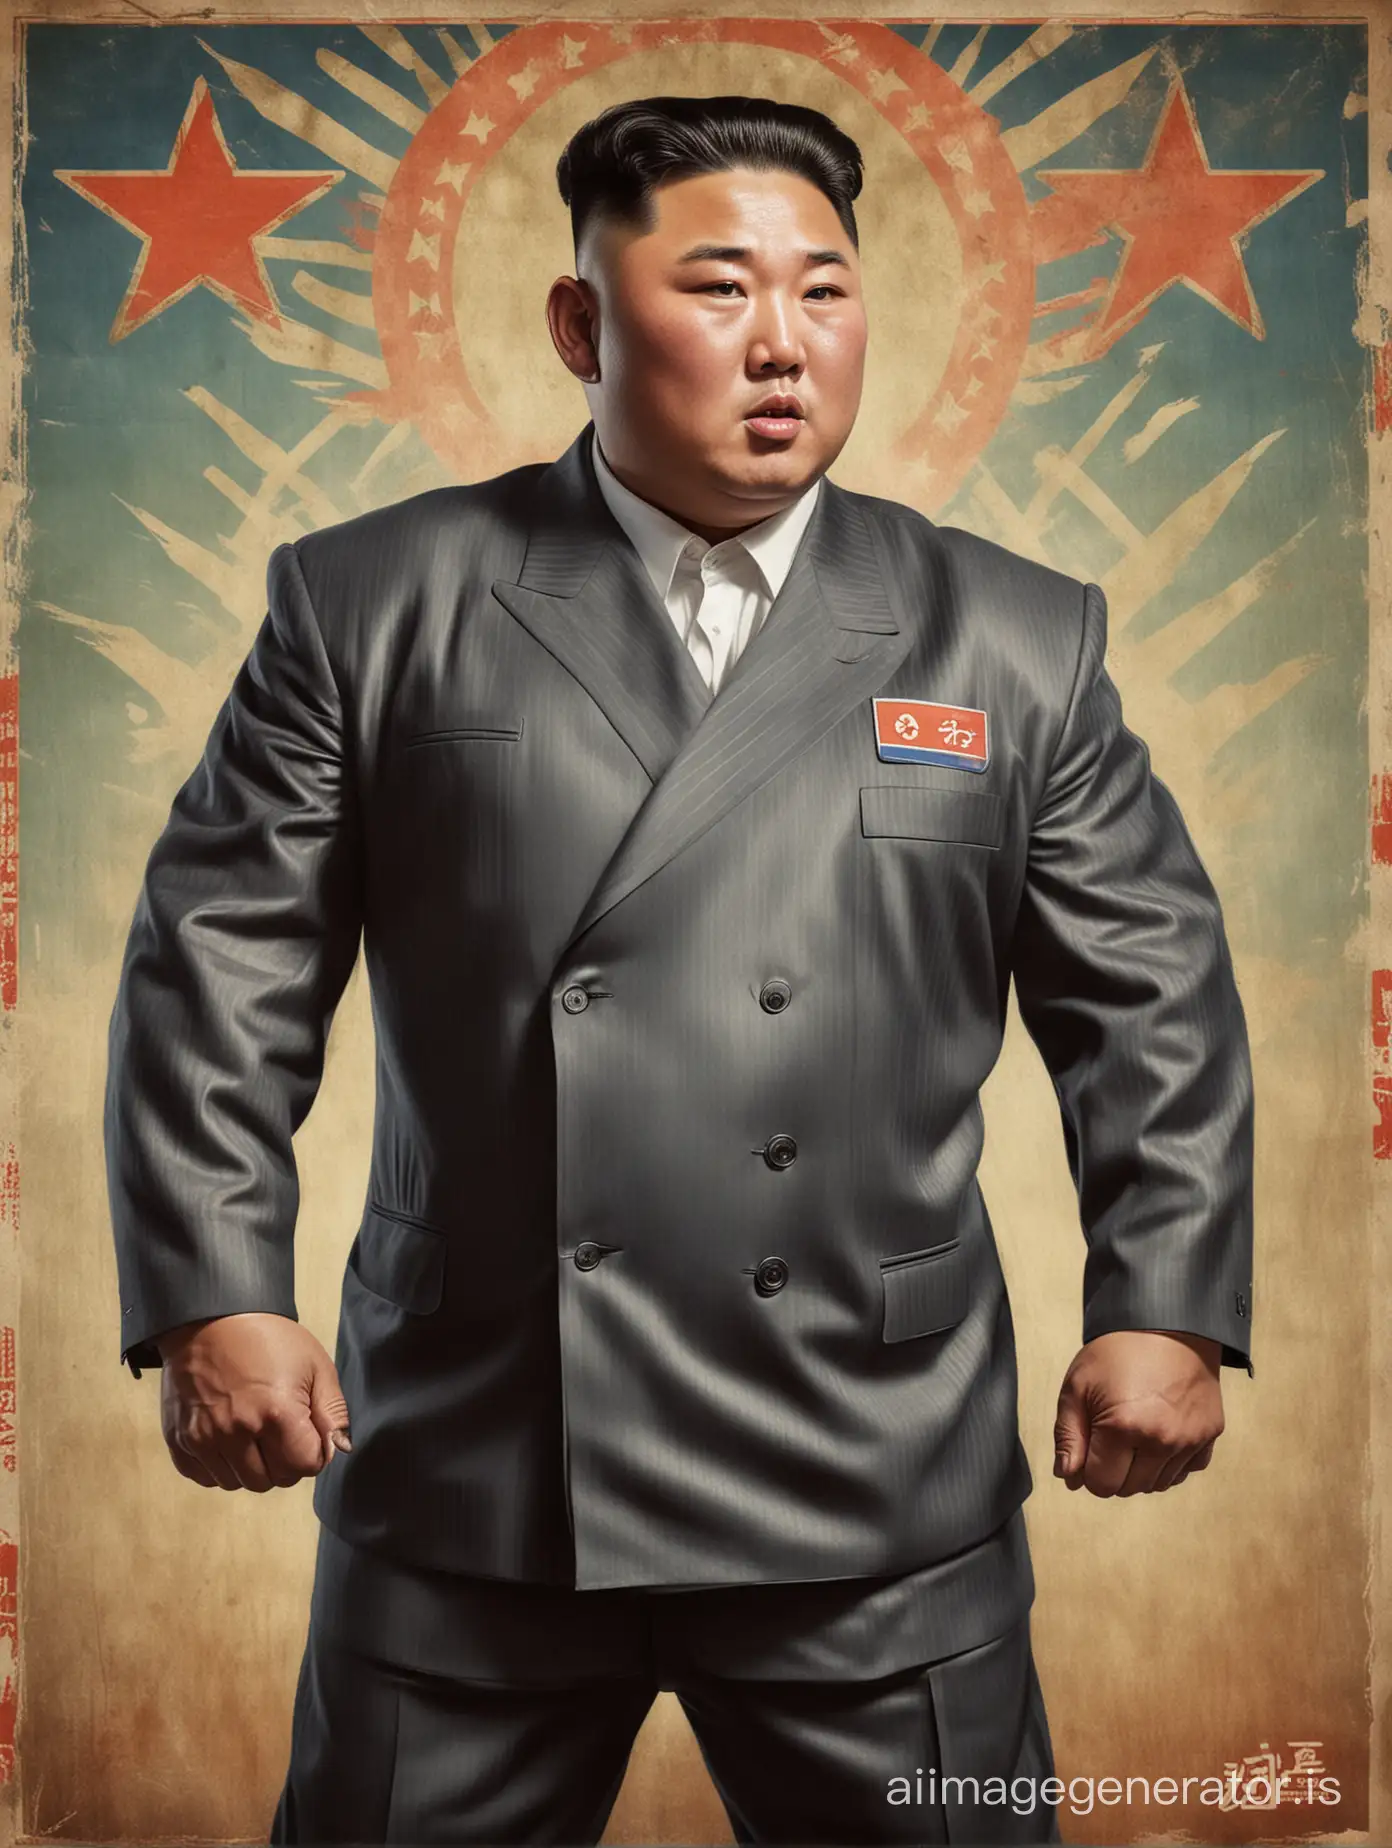 portrait of Kim Jong Un as a powerlifting bodybuilder wearing a suit bursting seams in the style of a vintage North Korean propaganda poster